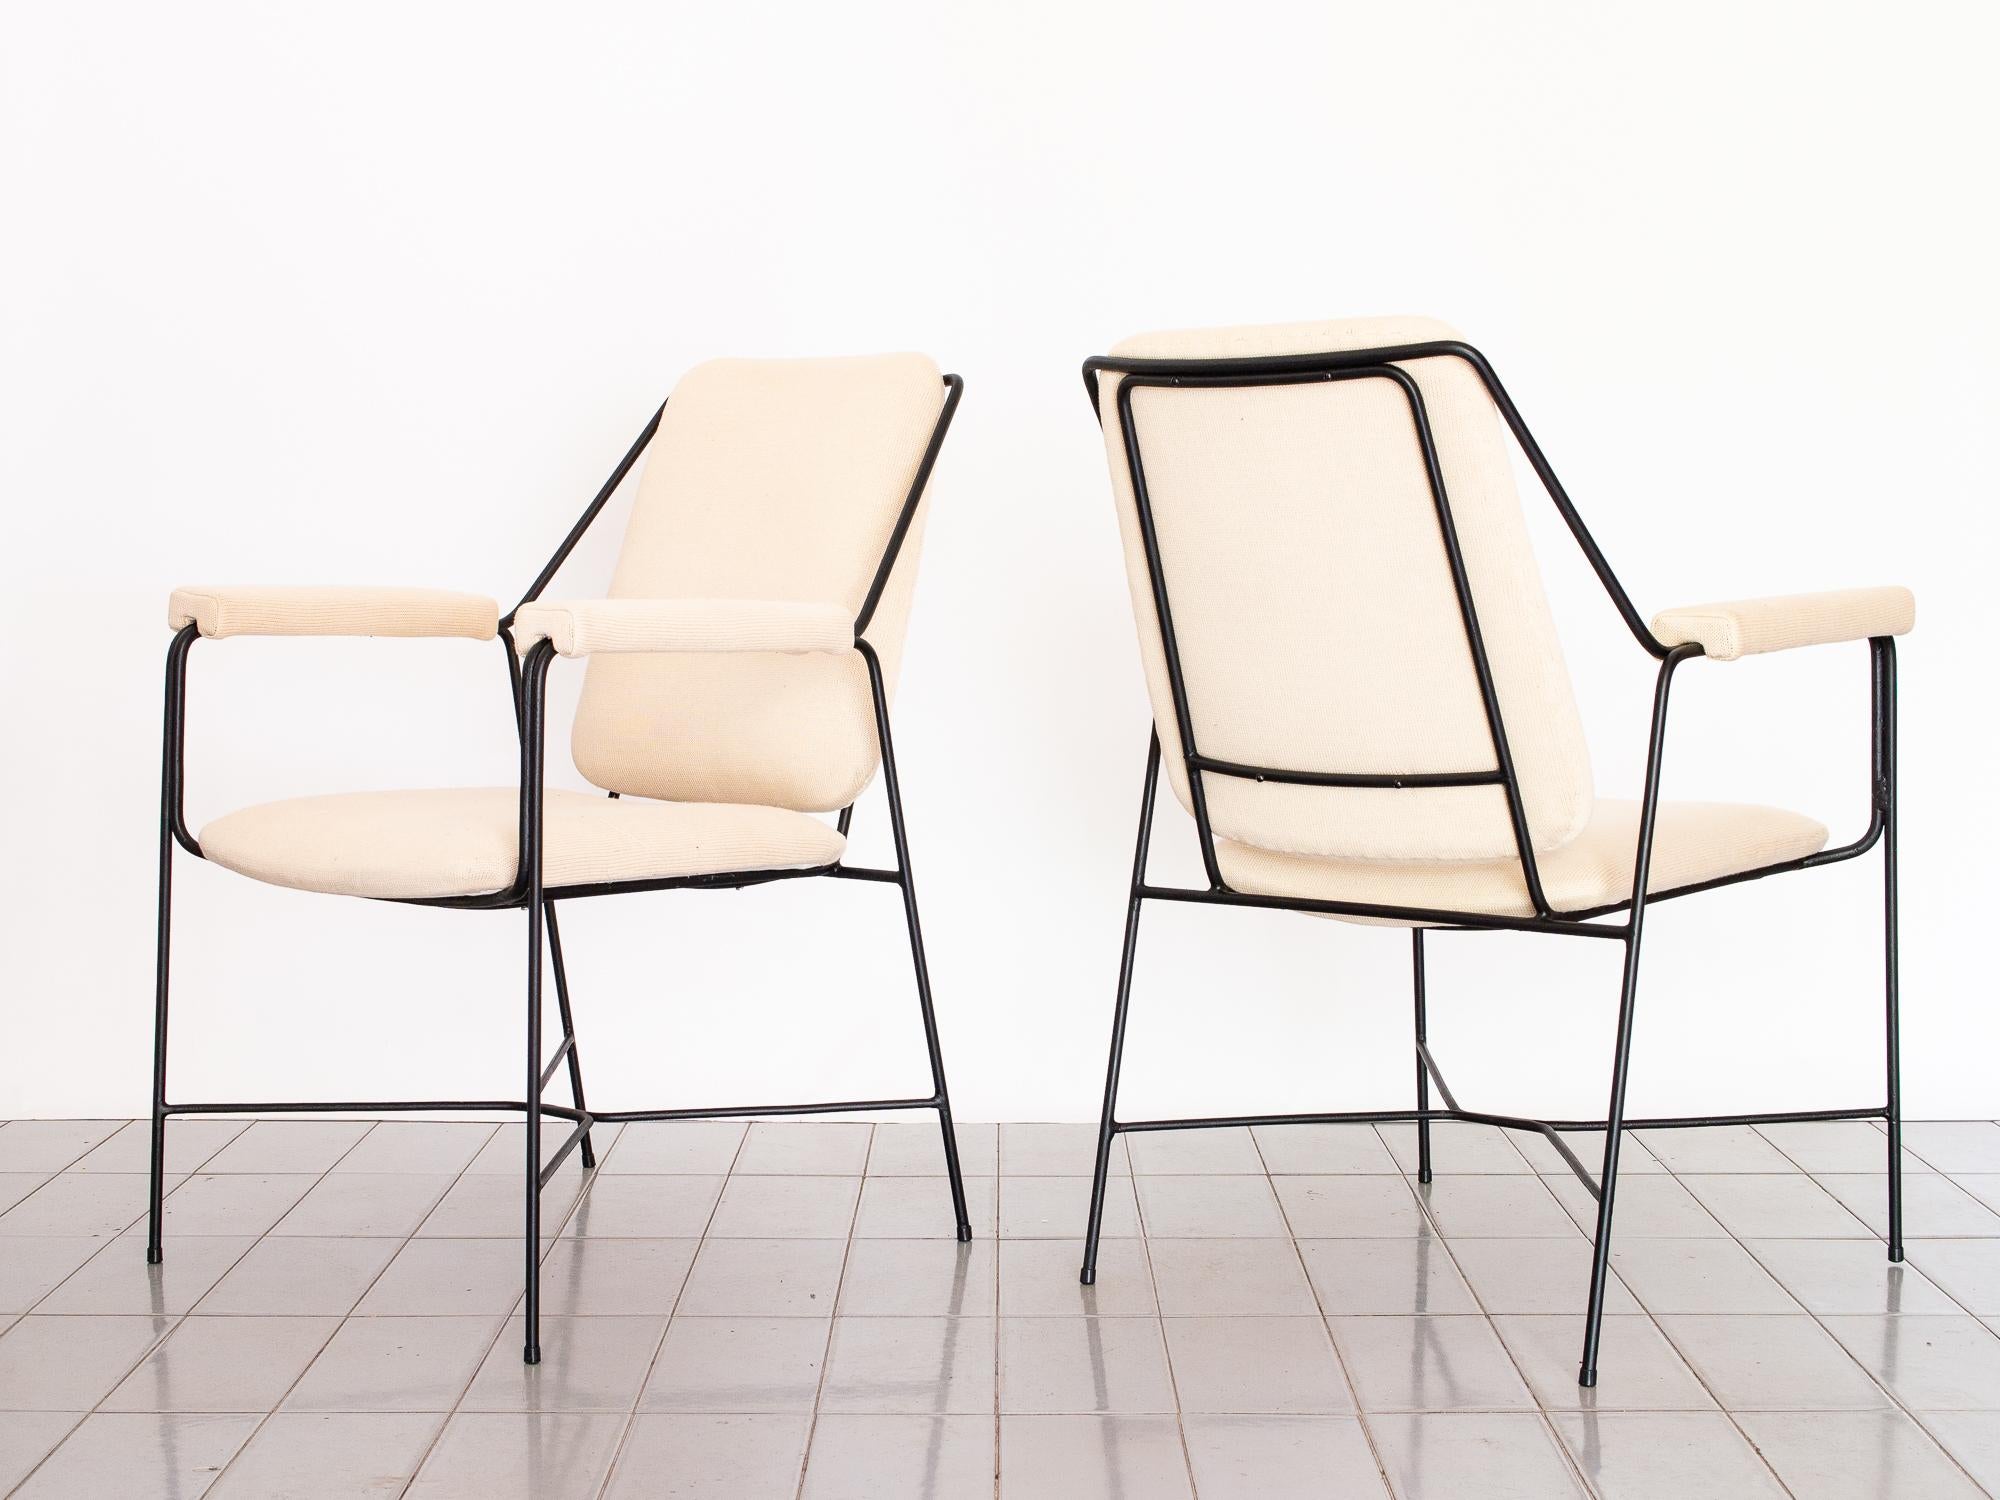 This super modern chairs have been repainted and reupholstered in an amazing off-white tricot fabric, super soft and cozy. The design of the chairs is sleek and they're super well built. High density foam on the seats ensure maximum comfort.

 